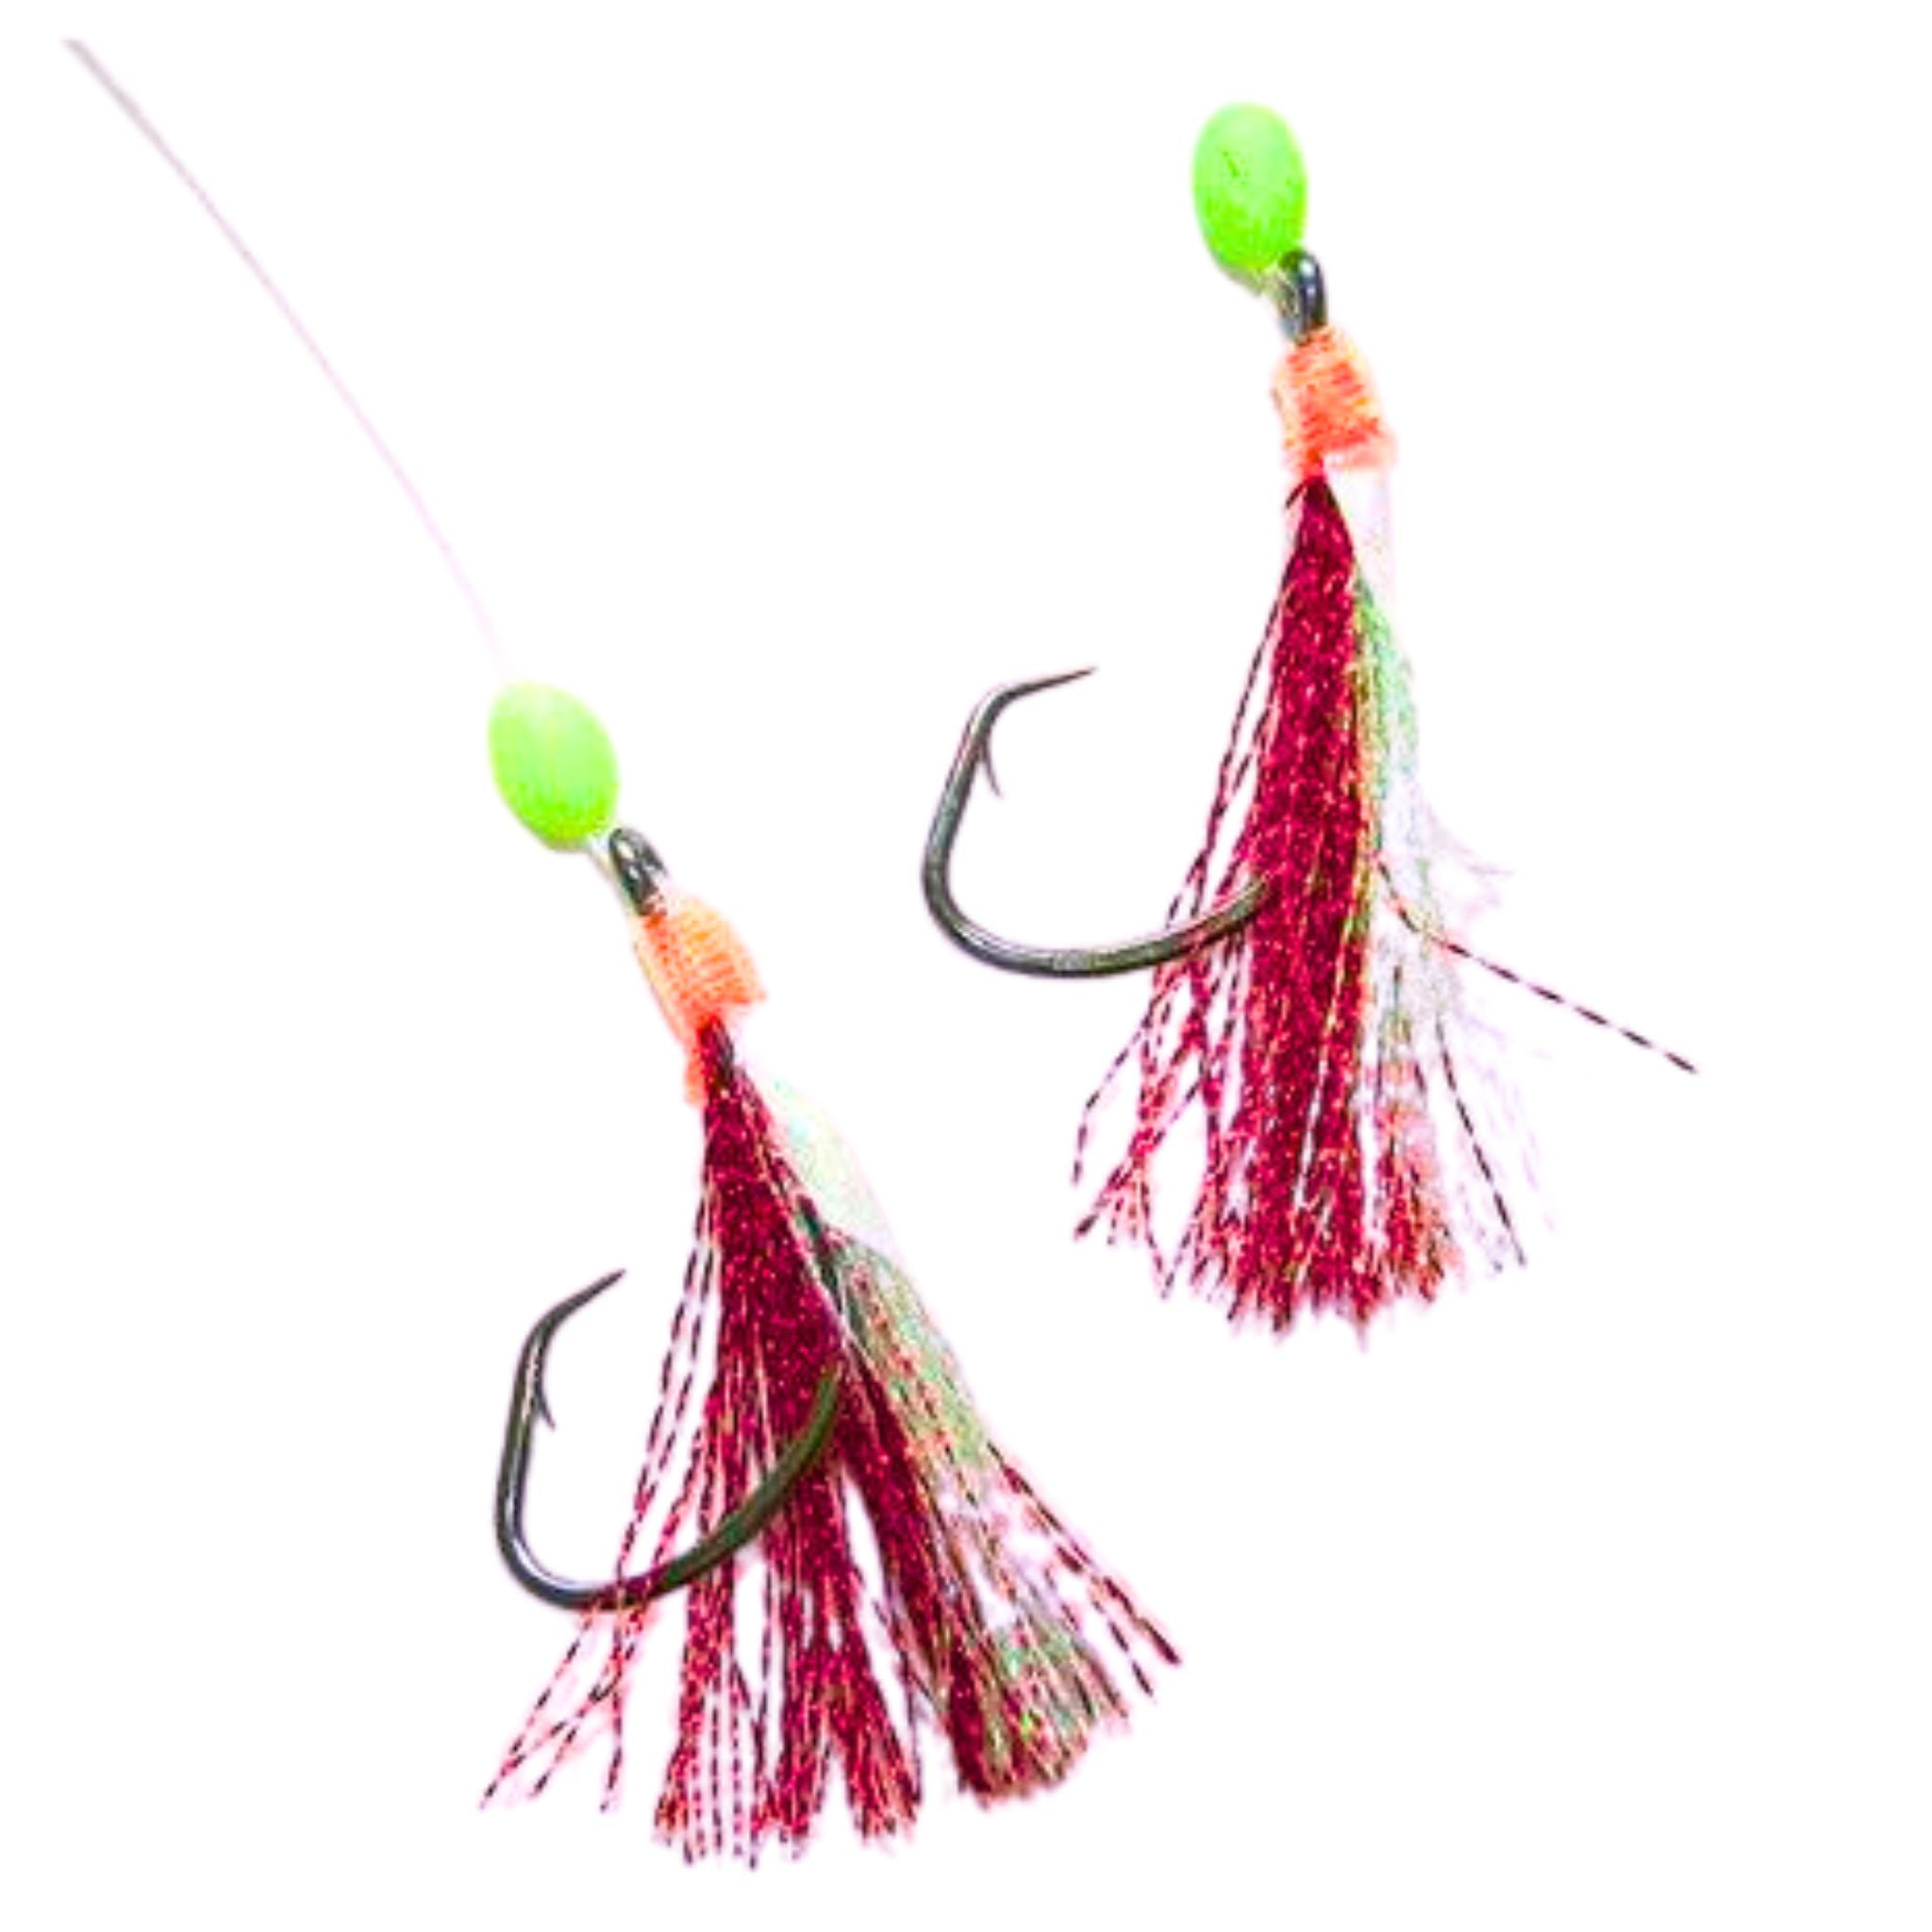 Snapper Mates Premade Paternoster Rig 5/0 Red/Chartreuse 2 Rigs